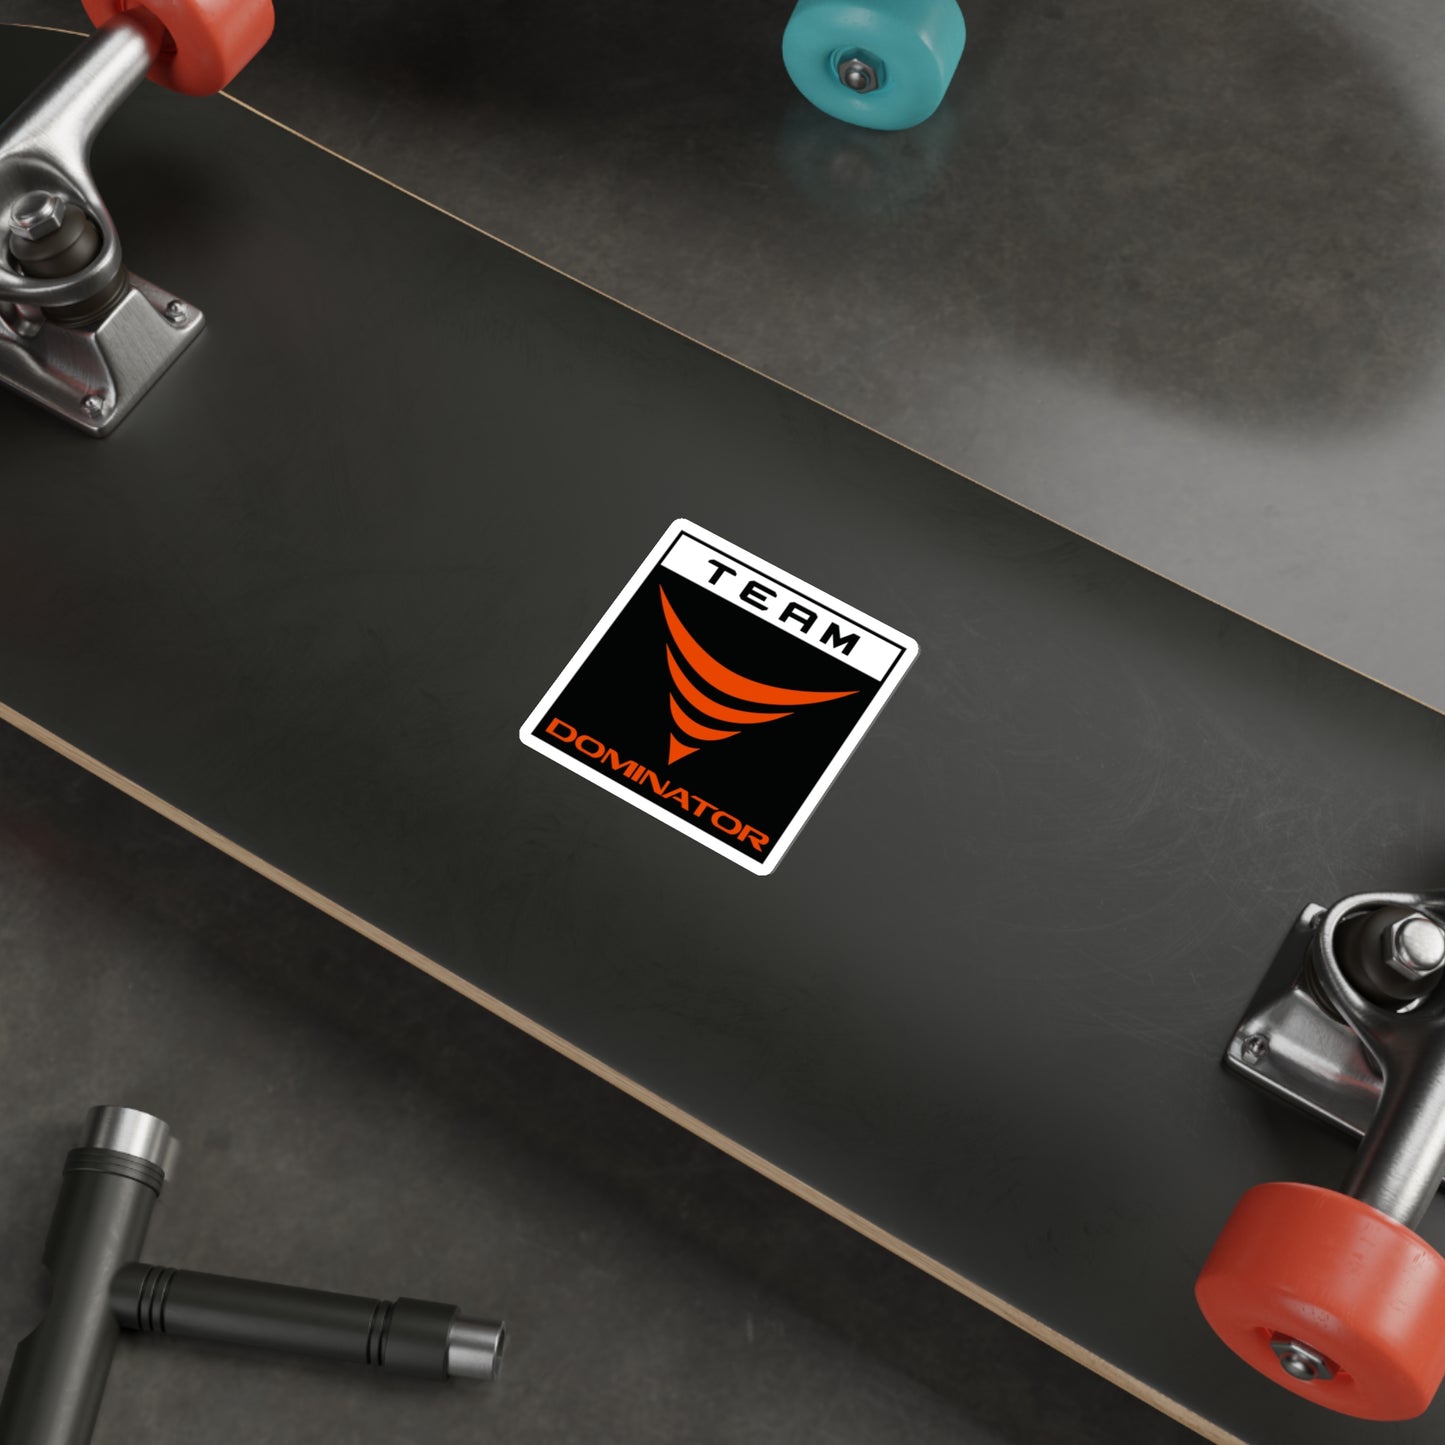 TEAM DOMINATOR BLACK/RED DIE-CUT STICKERS - Never Stop Chasing